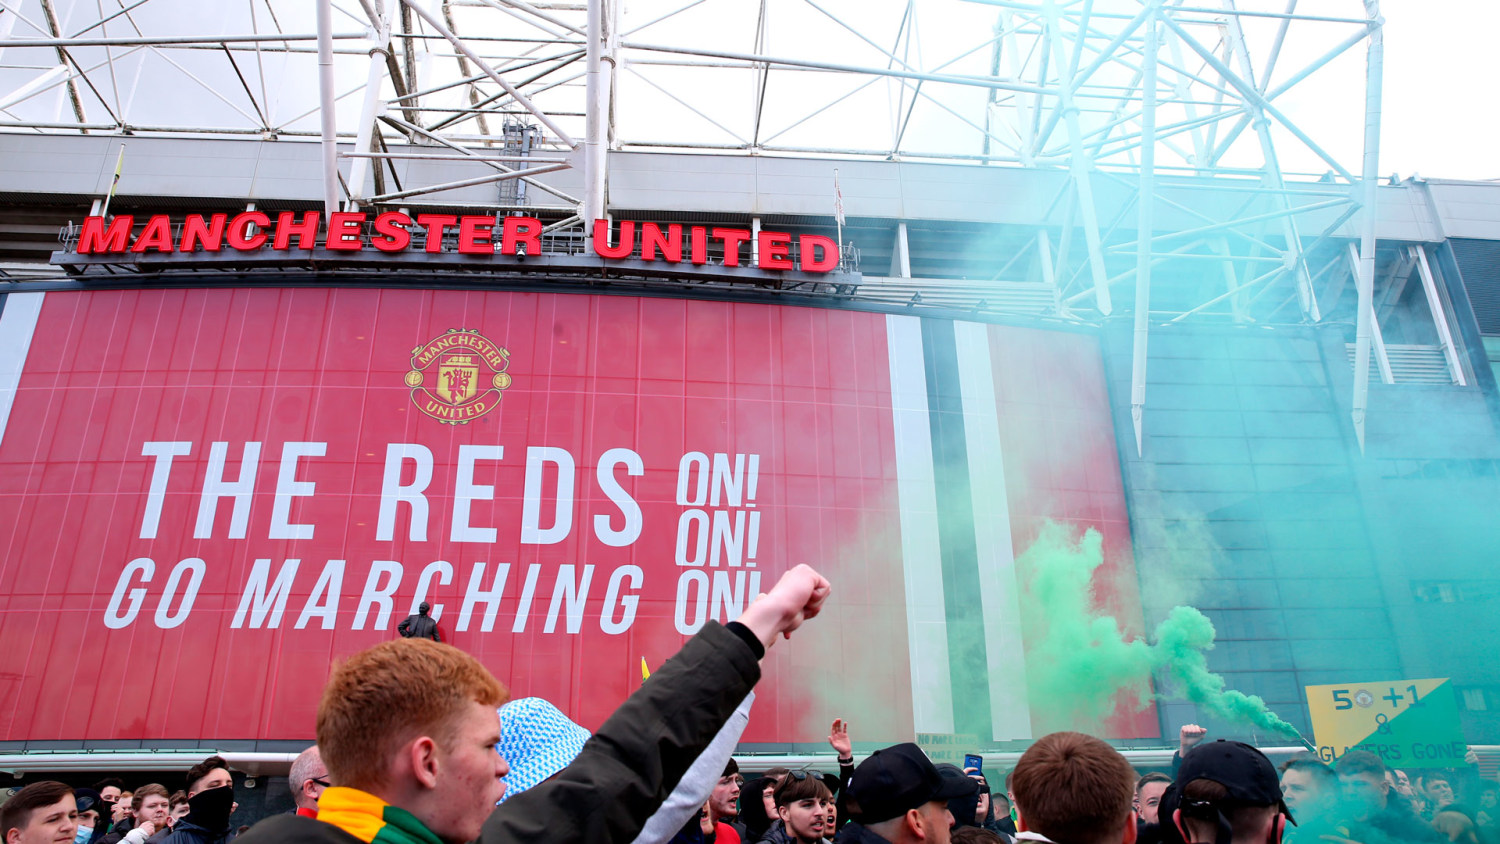 Manchester owners, reviled by of the team's fans, may sell club